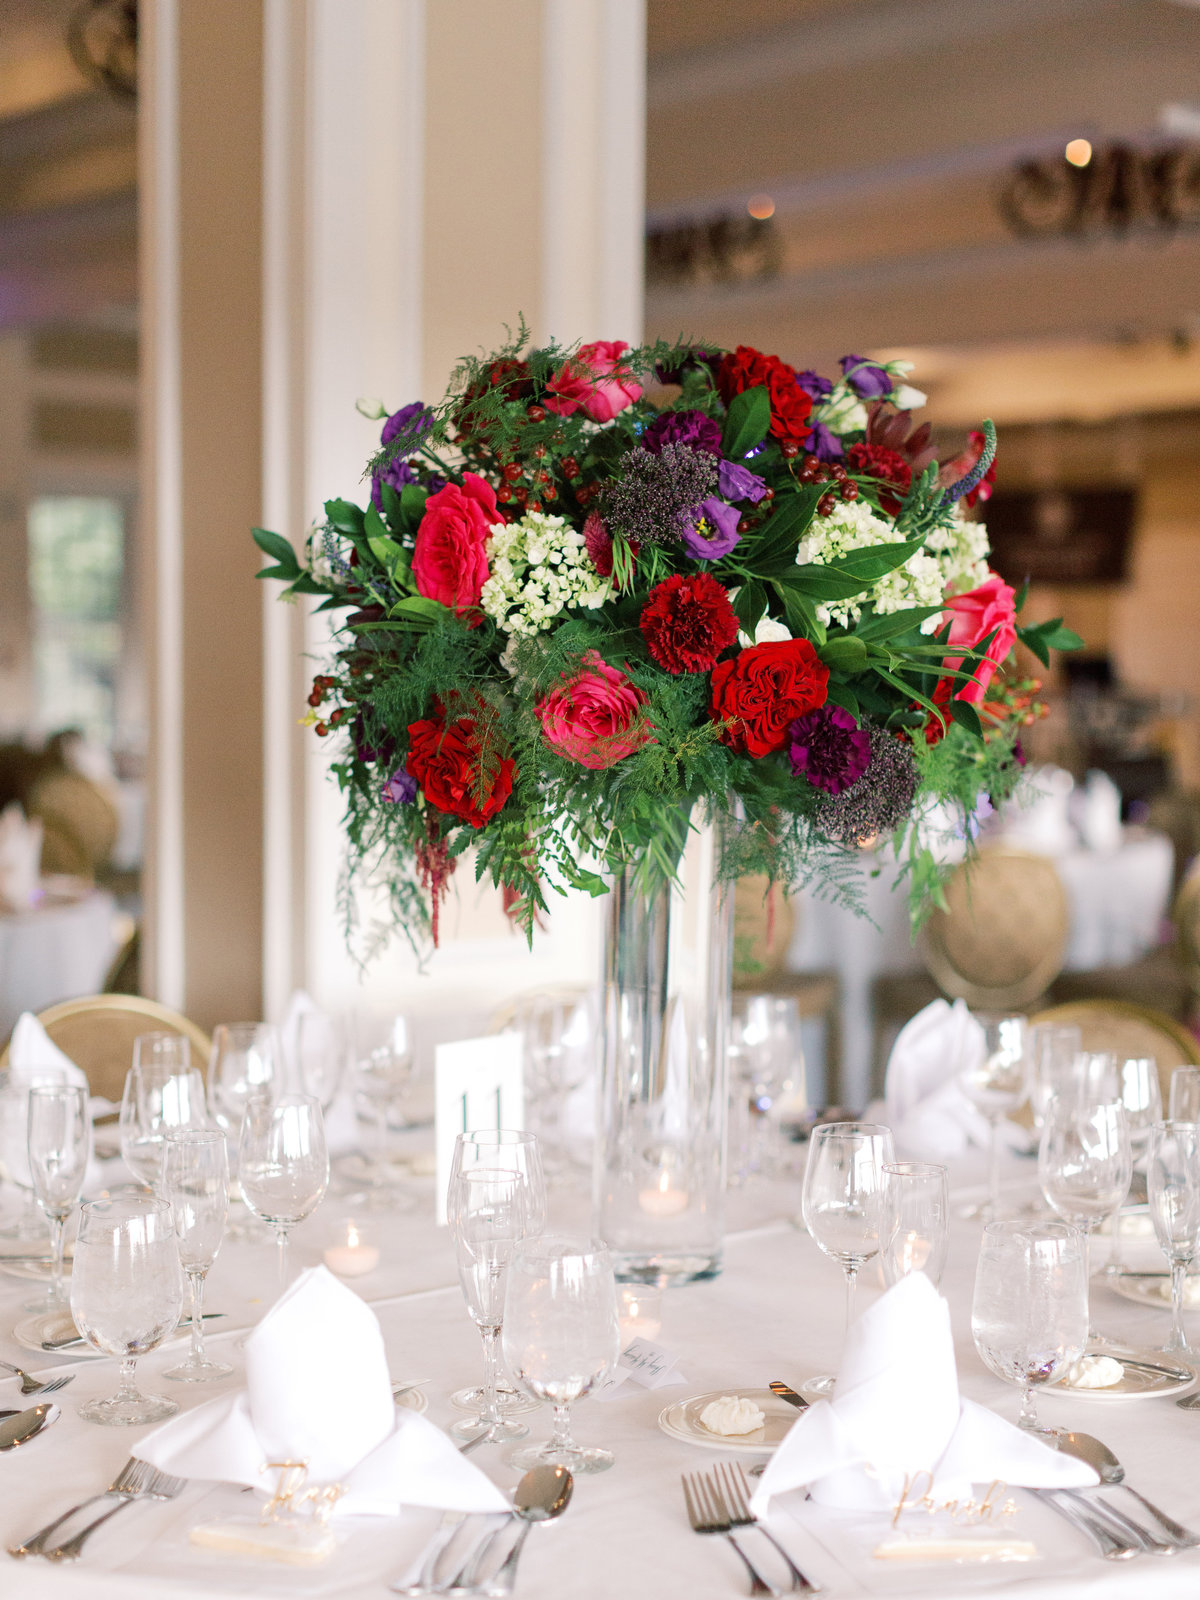 Jewel tone wedding at the Country Club of Fairfax